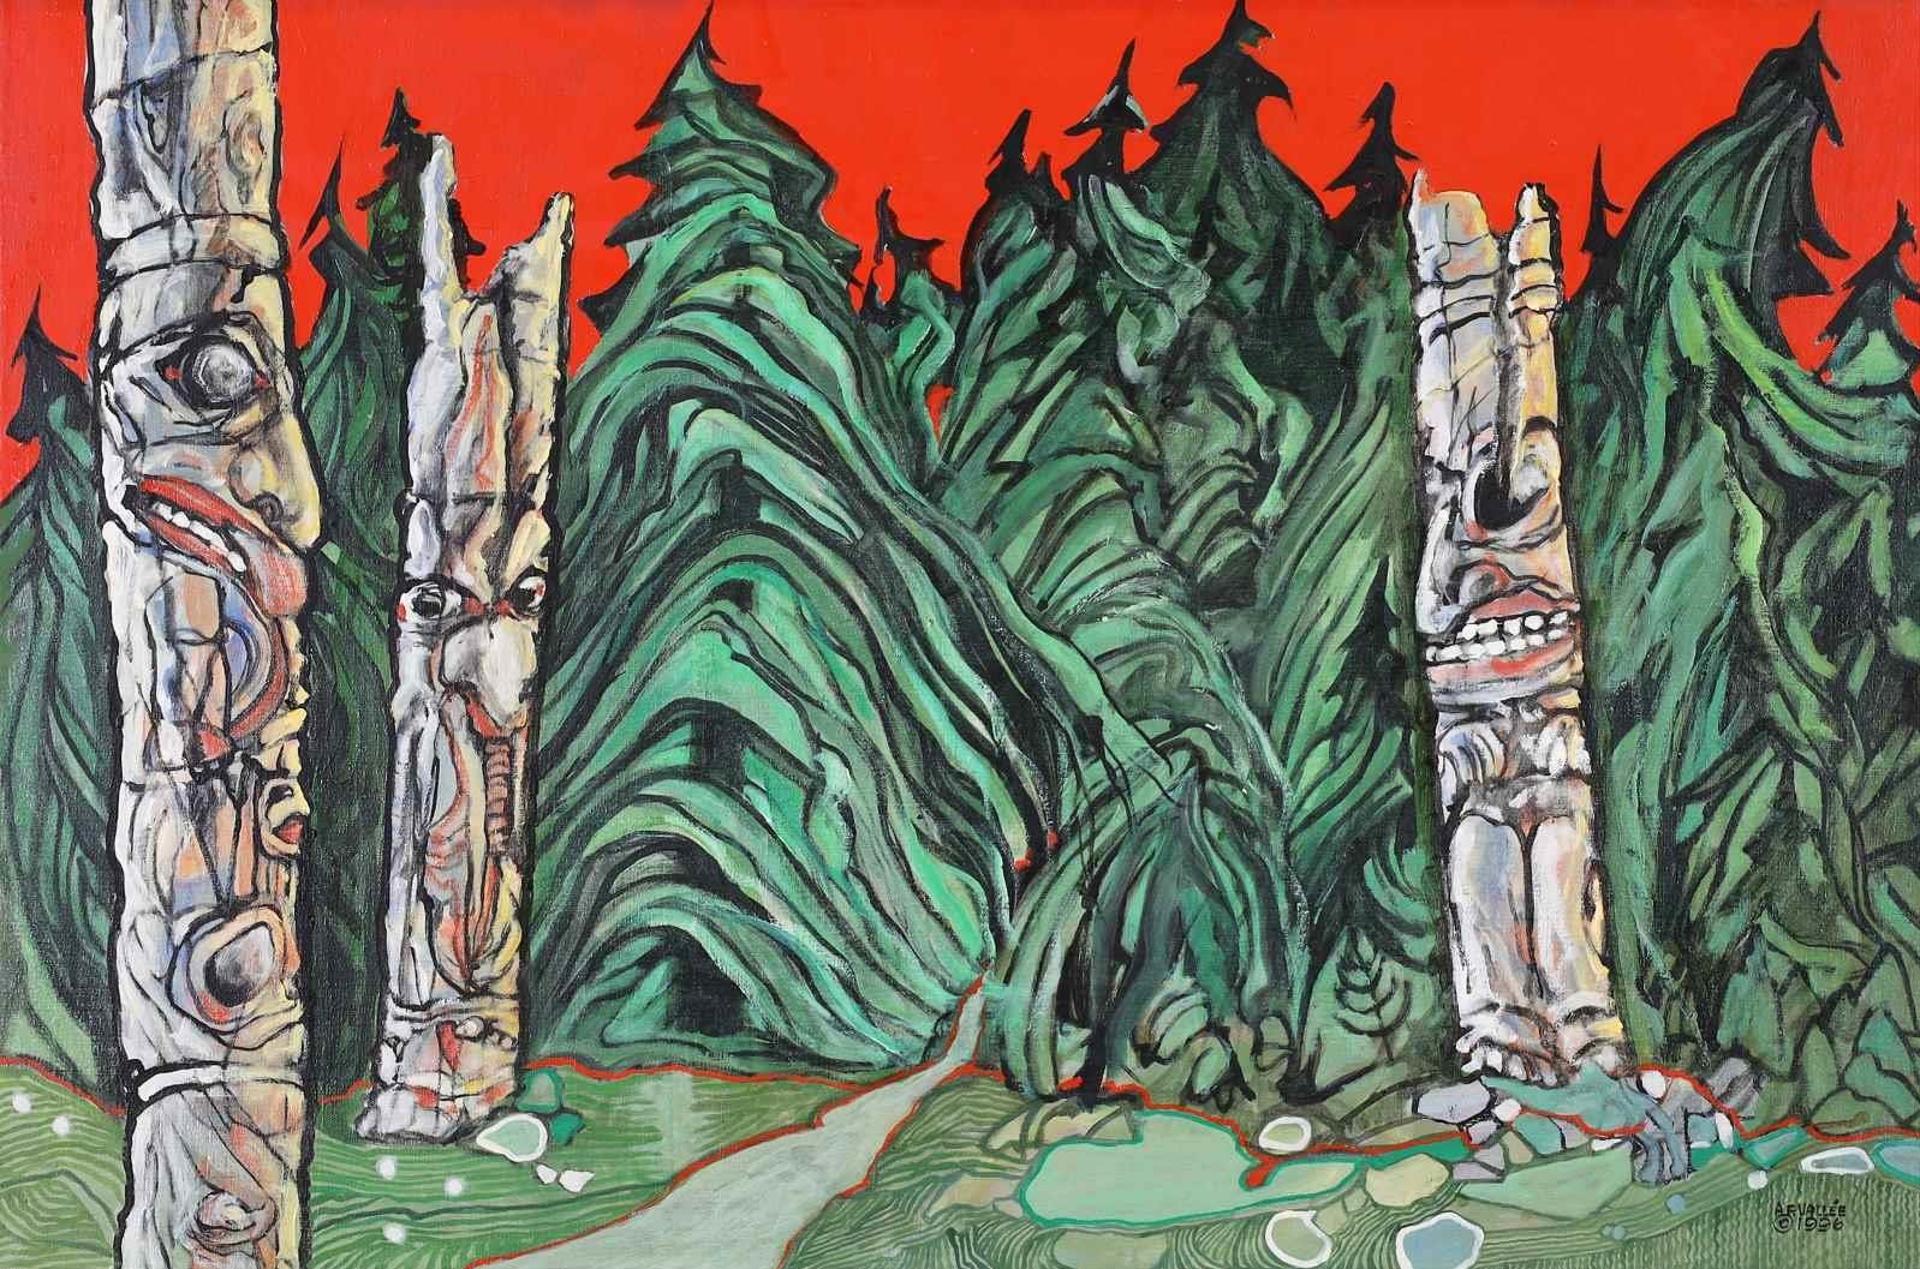 Armand Frederick Vallee (1921-2009) - Travels To The Island Totem, Queen Charlotte Islands; 1996